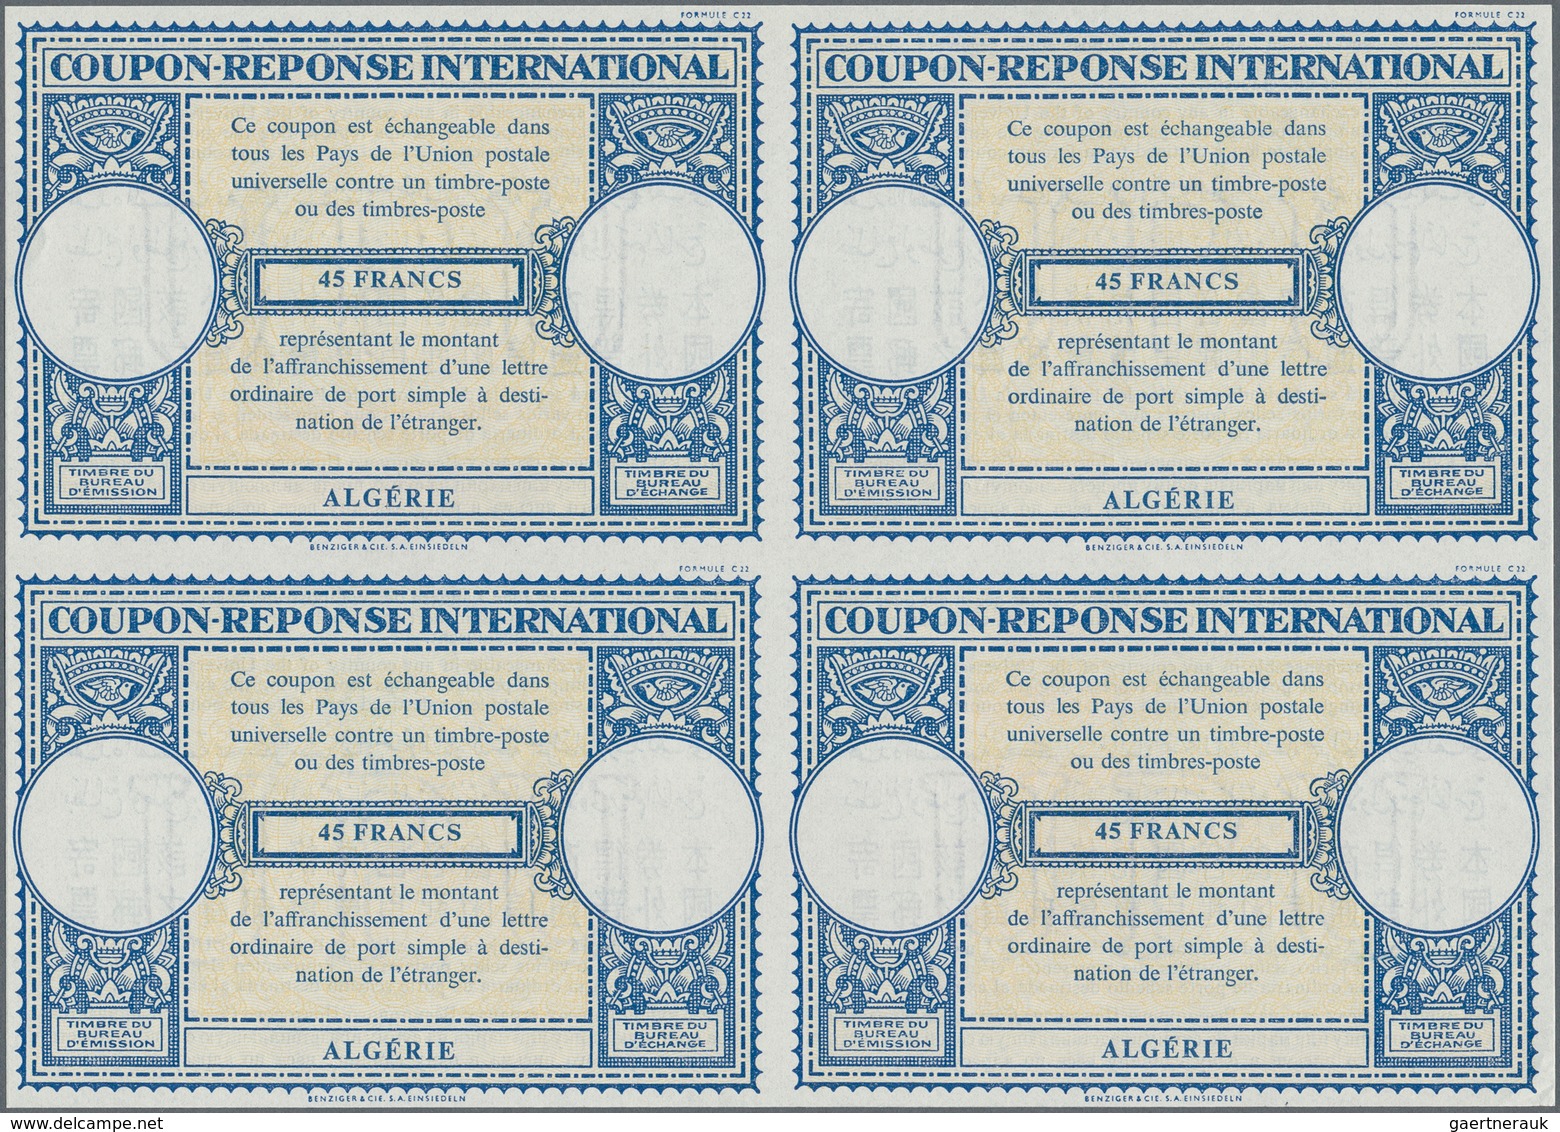 Algerien: 1950s (approx). International Reply Coupon 45 Francs (London Type) In An Unused Block Of 4 - Covers & Documents